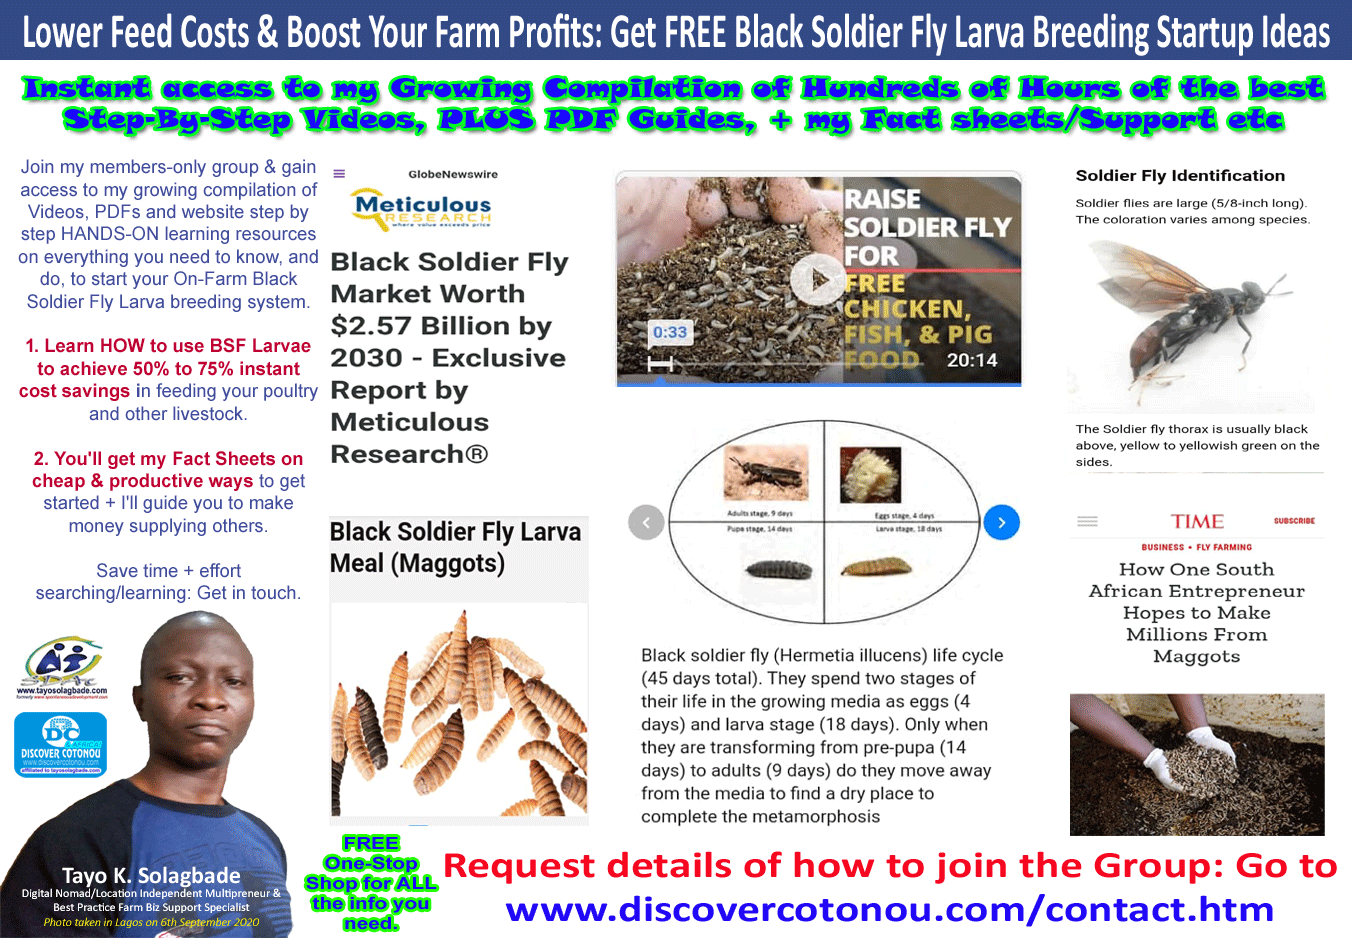 [FLYER] Lower Feed Costs & Boost Your Farm Profits: Get FREE Black Soldier Fly Larva Breeding Startup Ideas